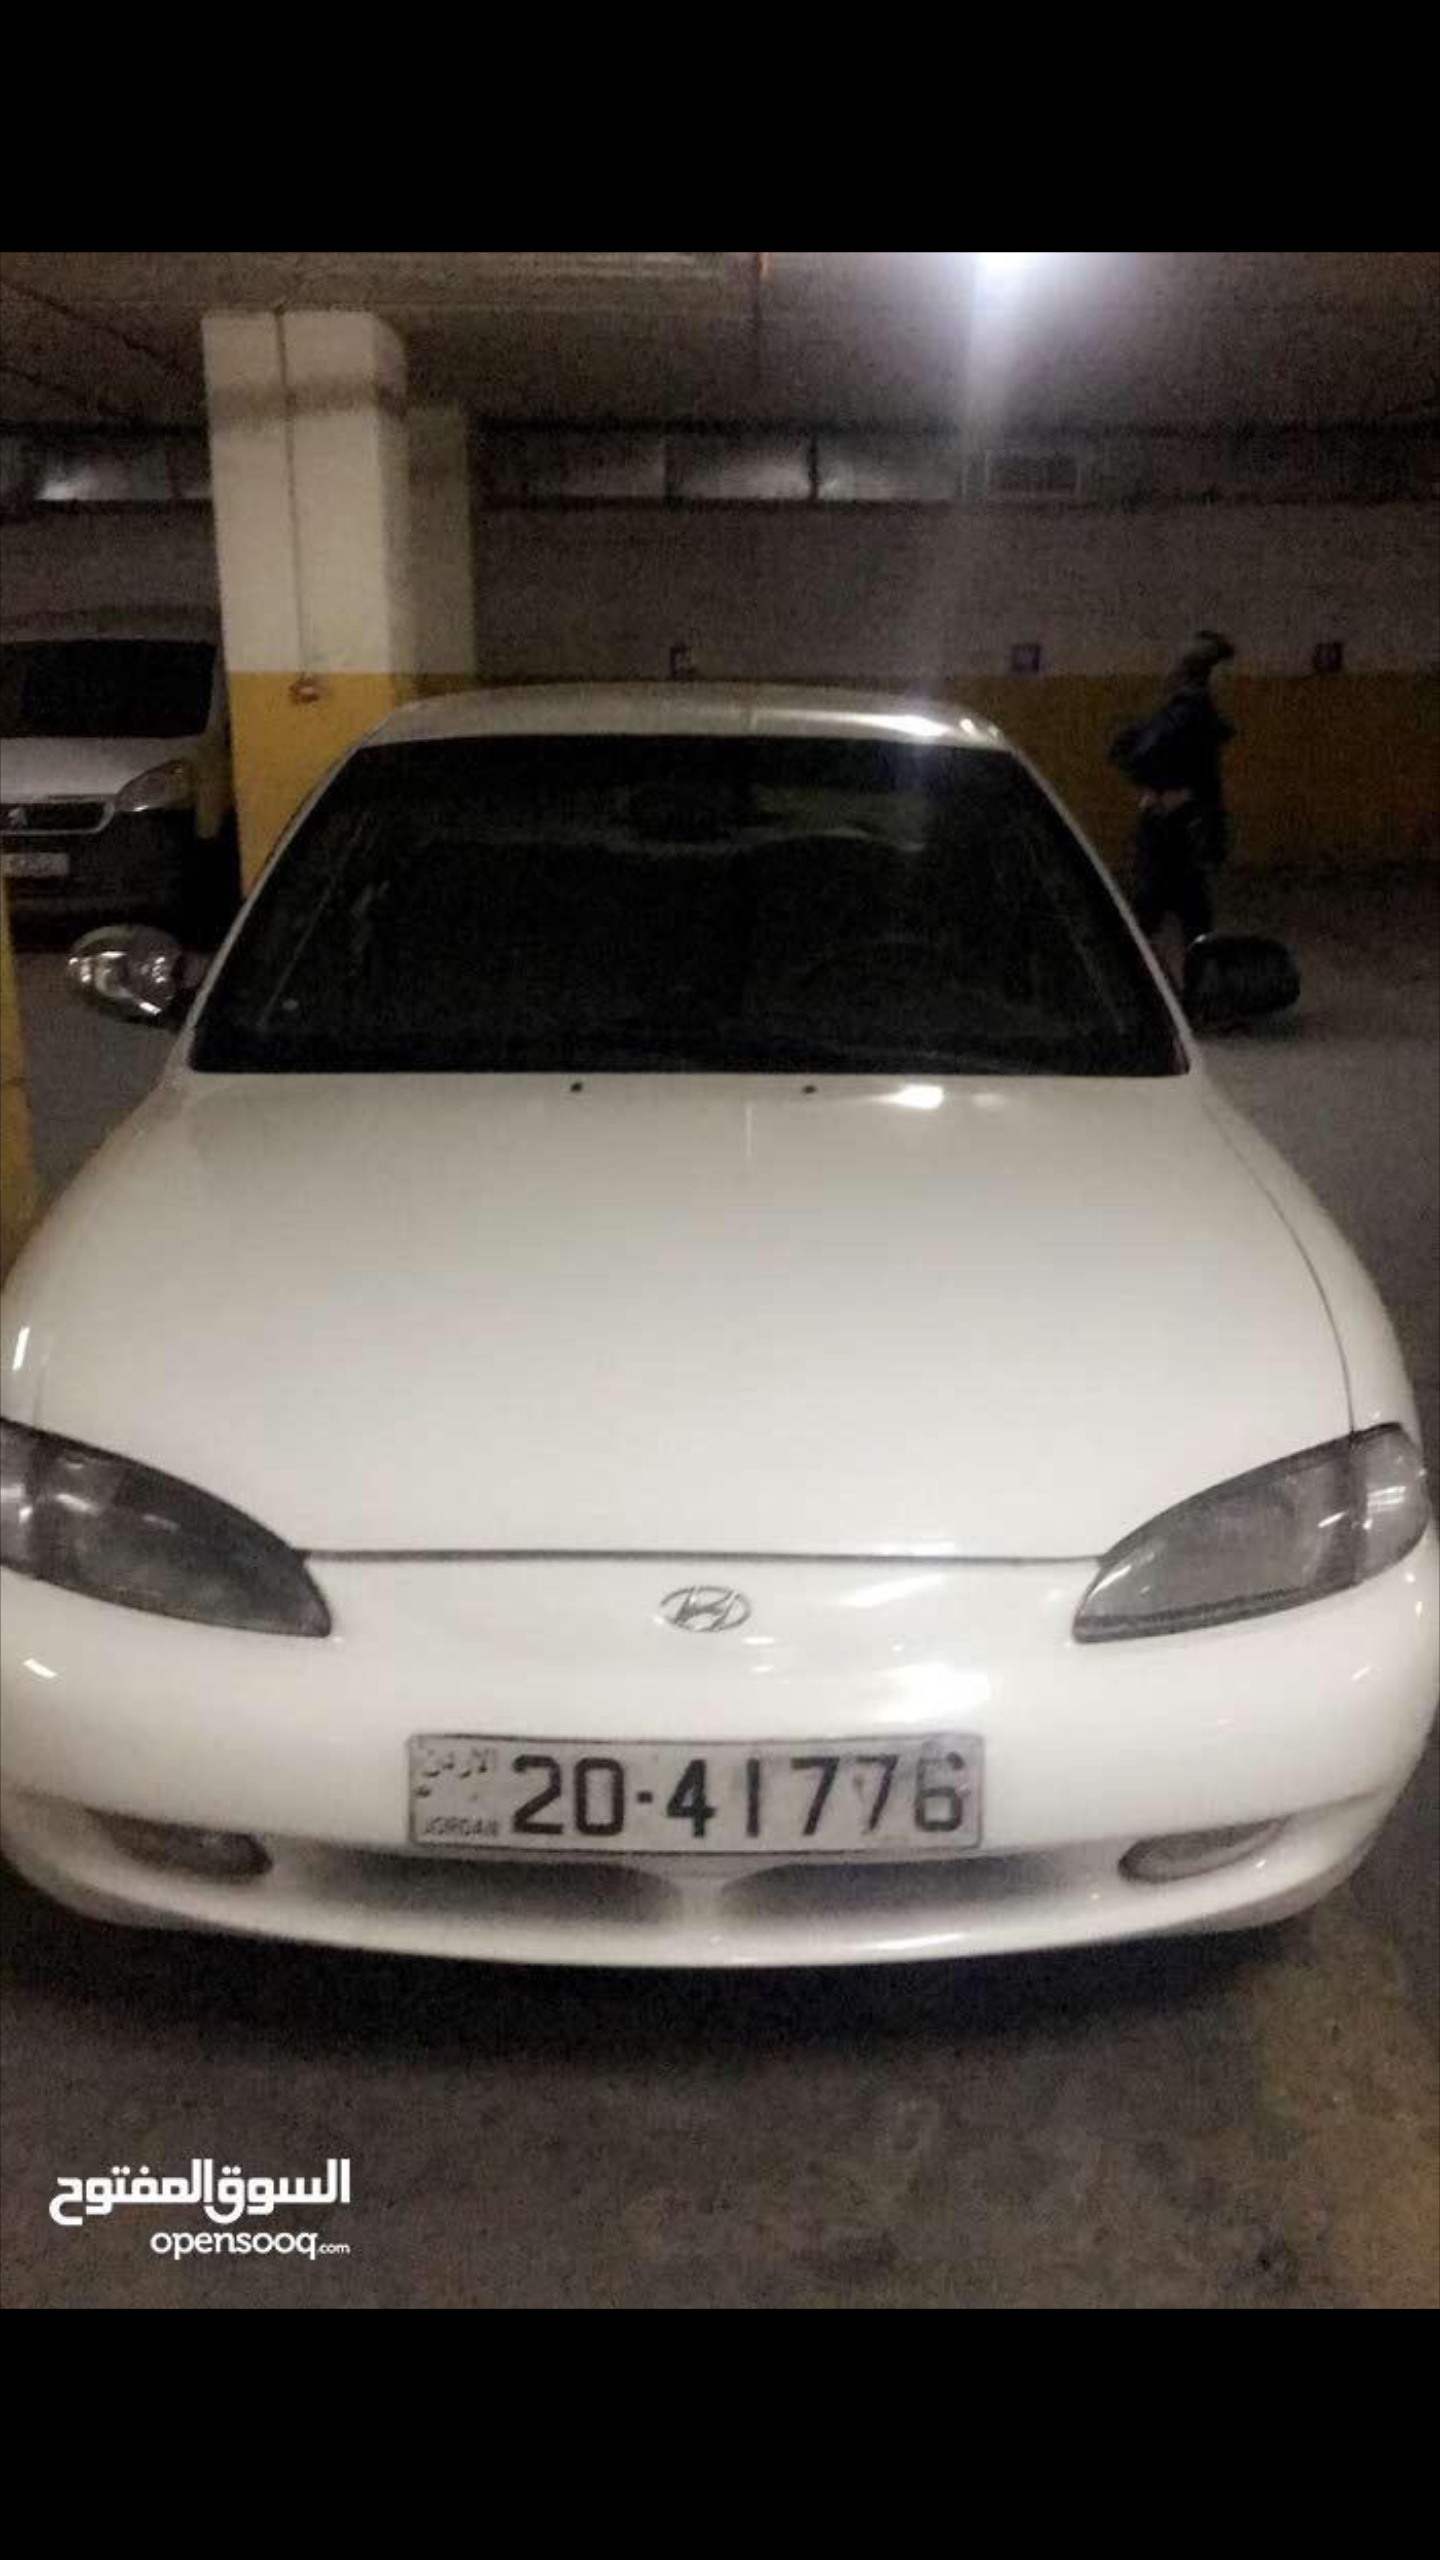 2020 Toyota Supra 3.0 Premium for sale in good and perfect working condition, no accident, no mechanical issues, very clean in and out, interested buyer should -  dareen80 لا تنسَ أنك...